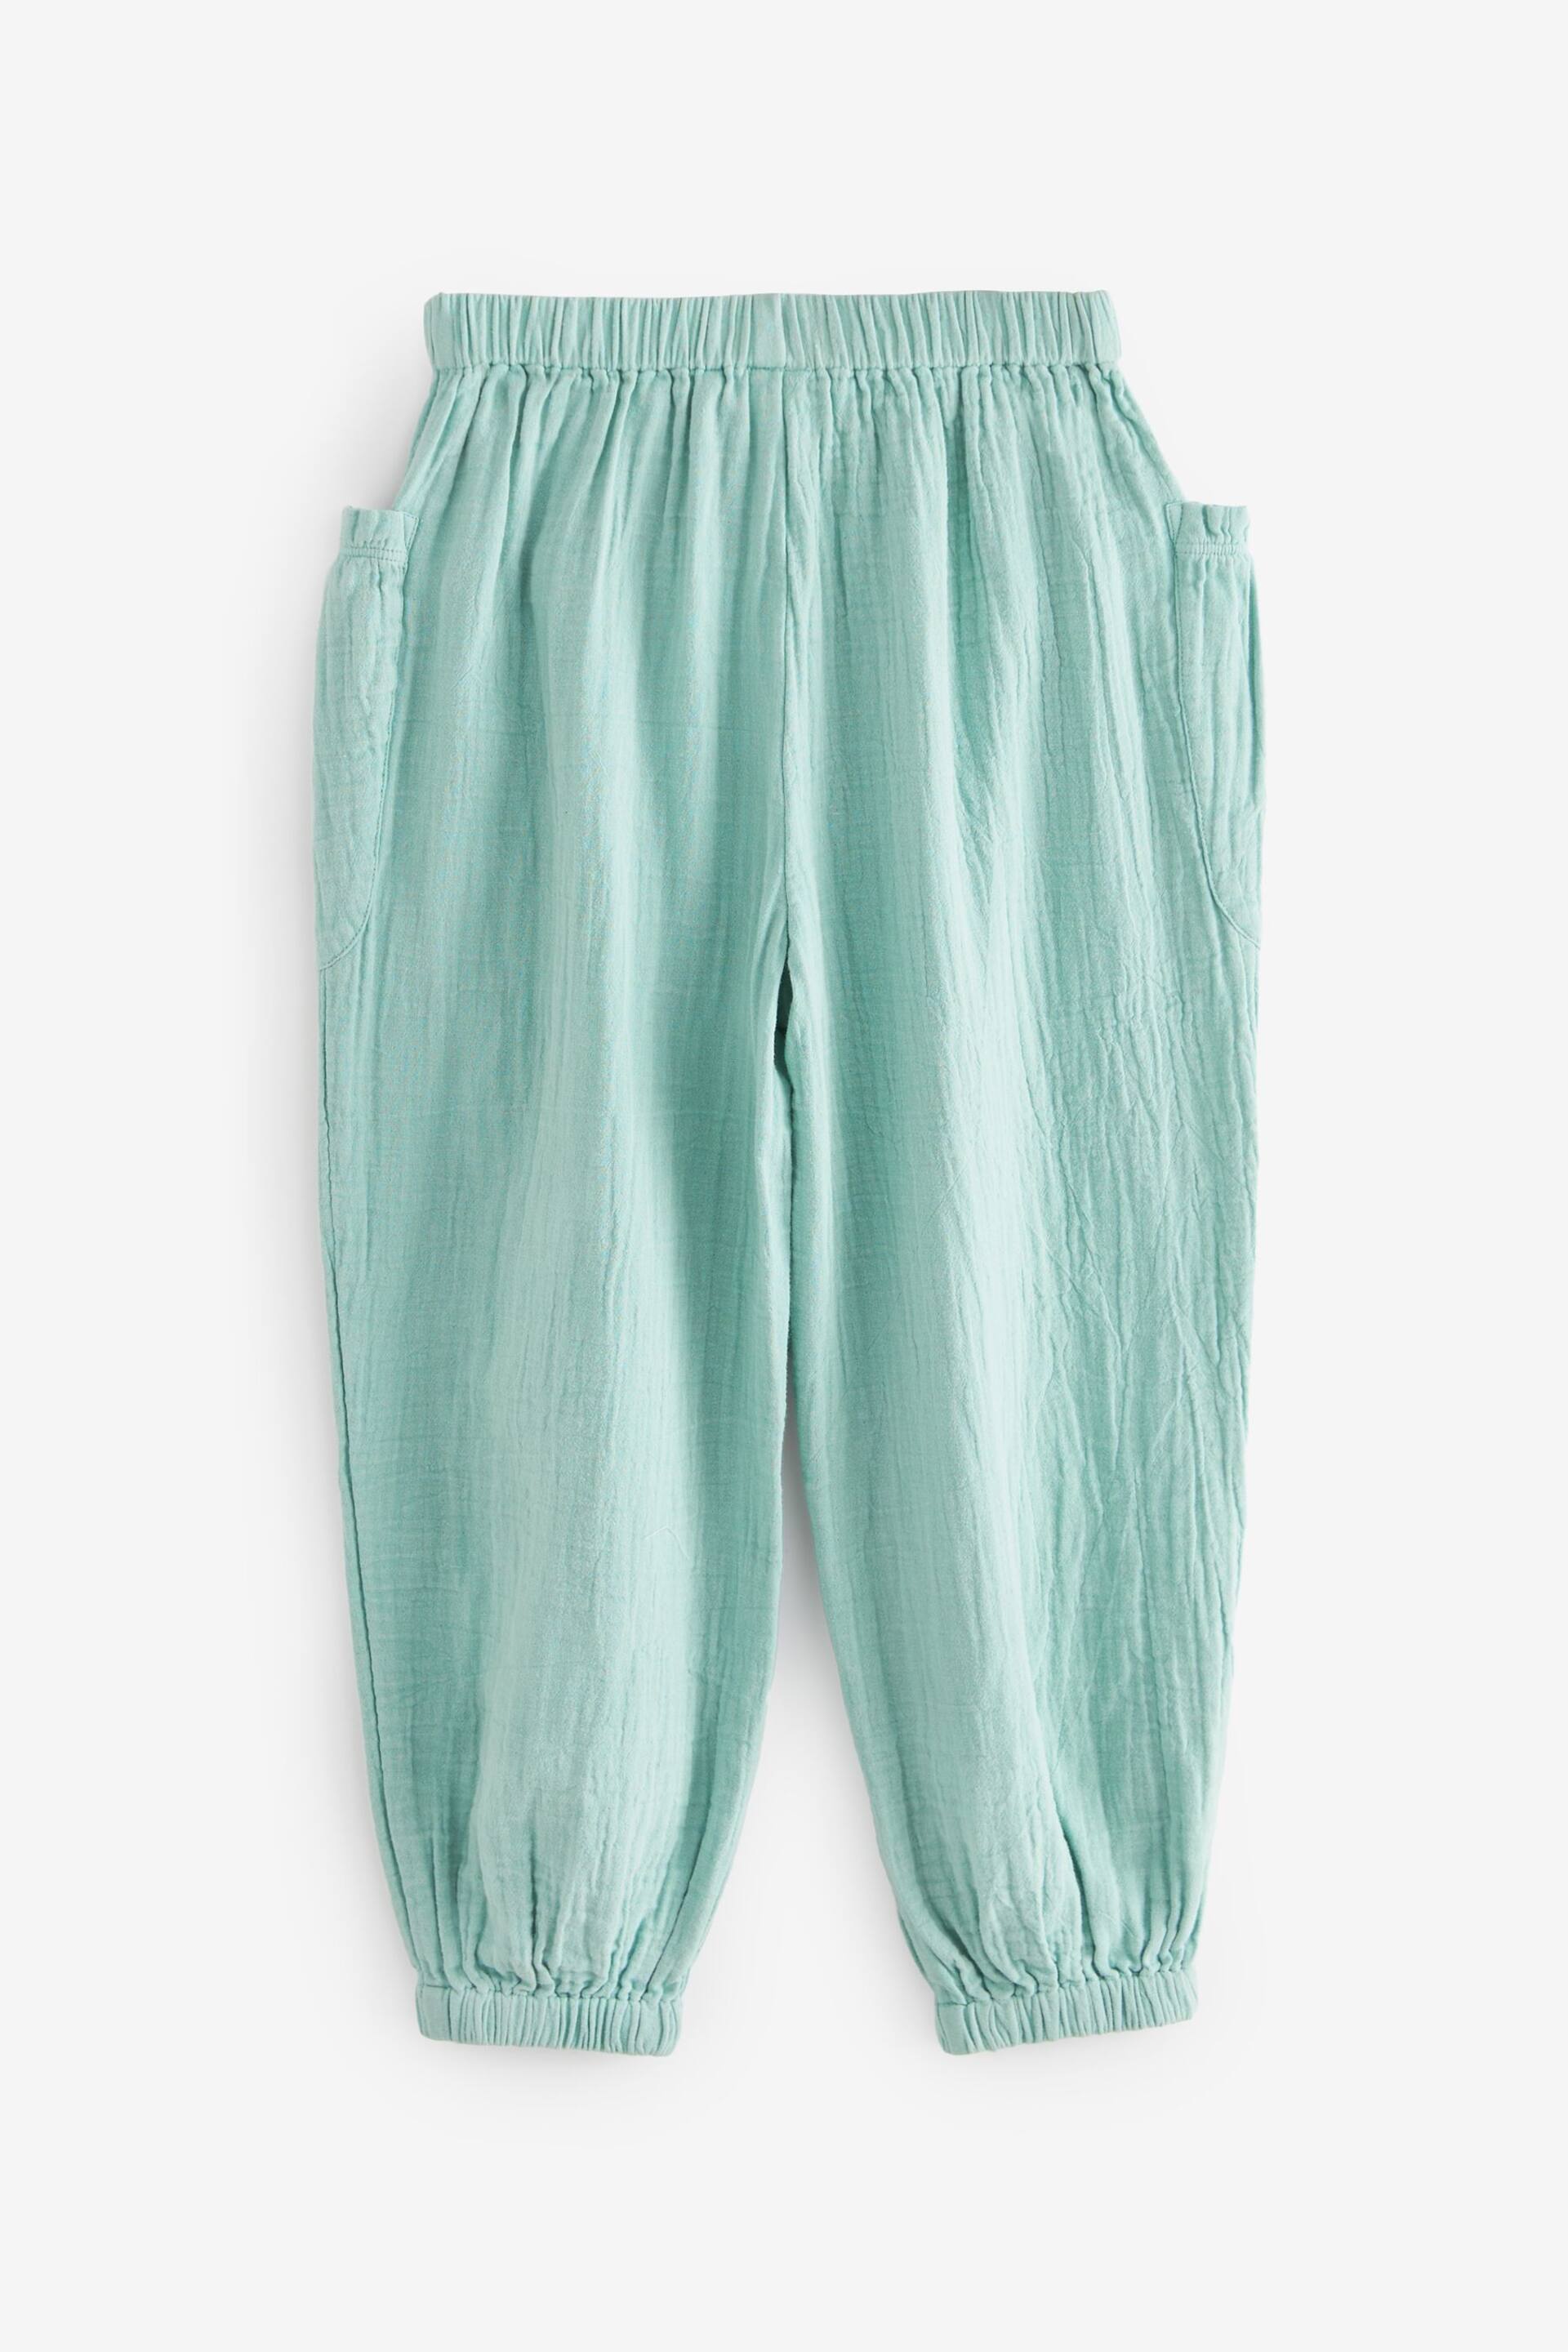 Teal Blue Textured Pull-On Trousers (3-16yrs) - Image 6 of 7